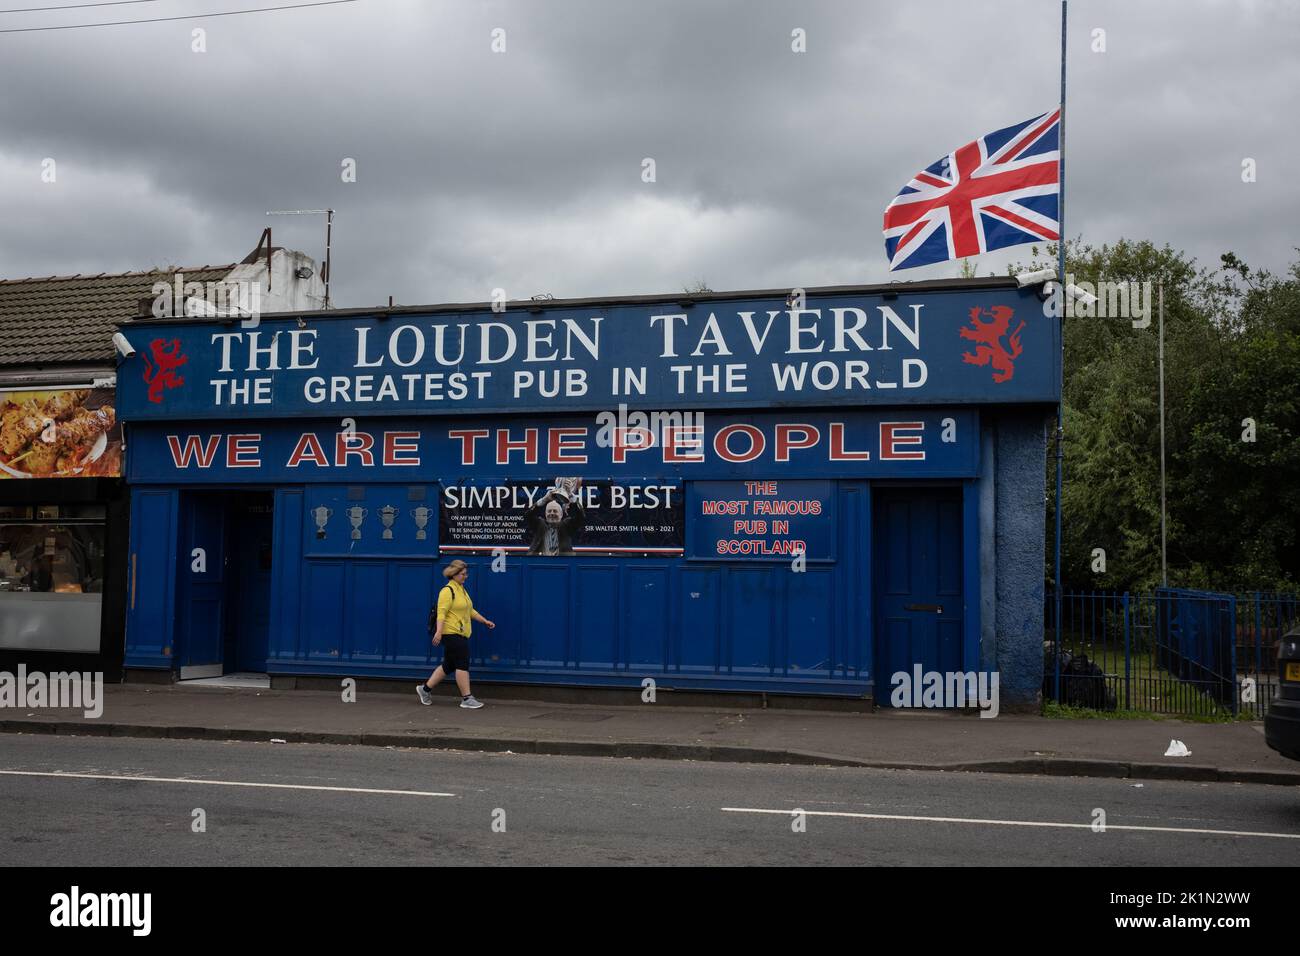 Glasgow, Scotland, 19 September 2022. The Union flag flies at half mast on the Rangers FC supporters’ Louden Tavern bar, as a mark of respect for Her Majesty Queen Elizabeth II who died on 8th September, in Glasgow, Scotland, 19 September 2022. Photo credit: Jeremy Sutton-Hibbert/Alamy Live News. Stock Photo